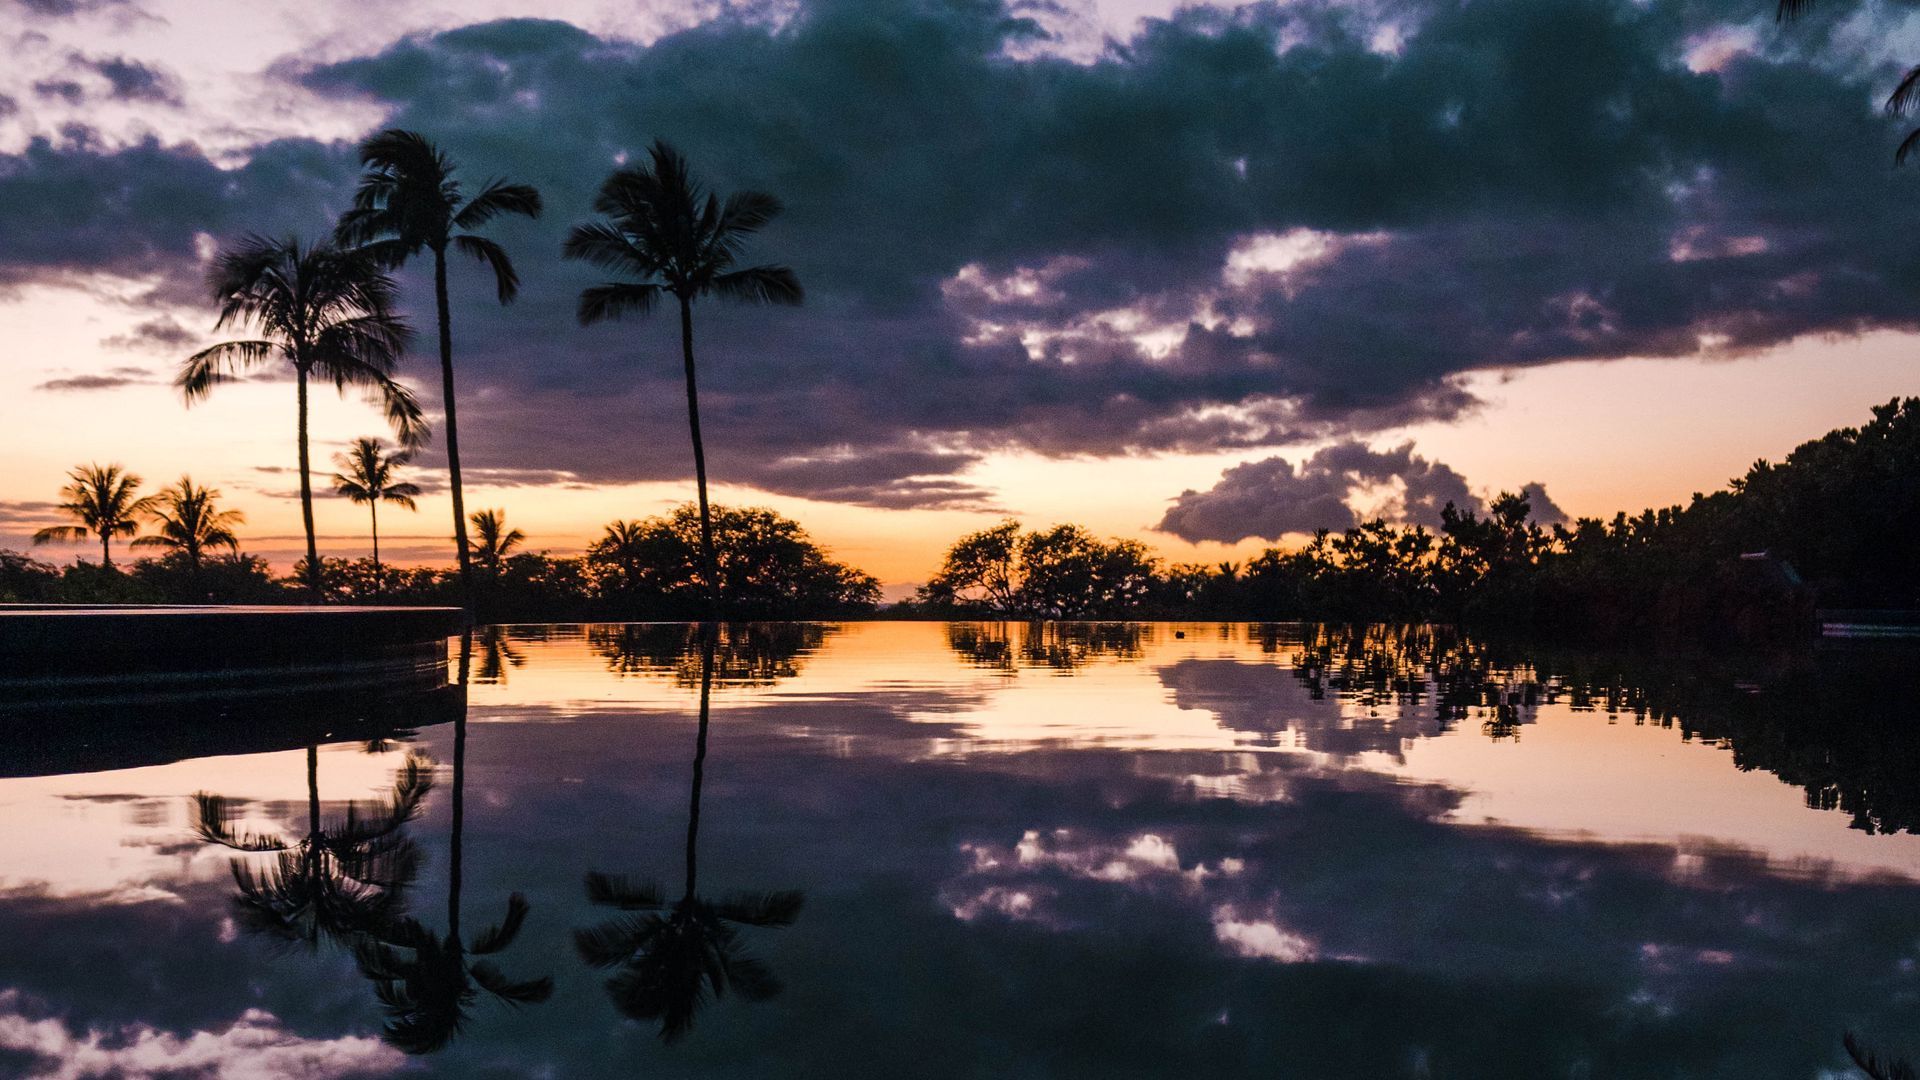 Download wallpaper 1920x1080 palm trees, sunset, water, reflection full hd, hdtv, fhd, 1080p HD background